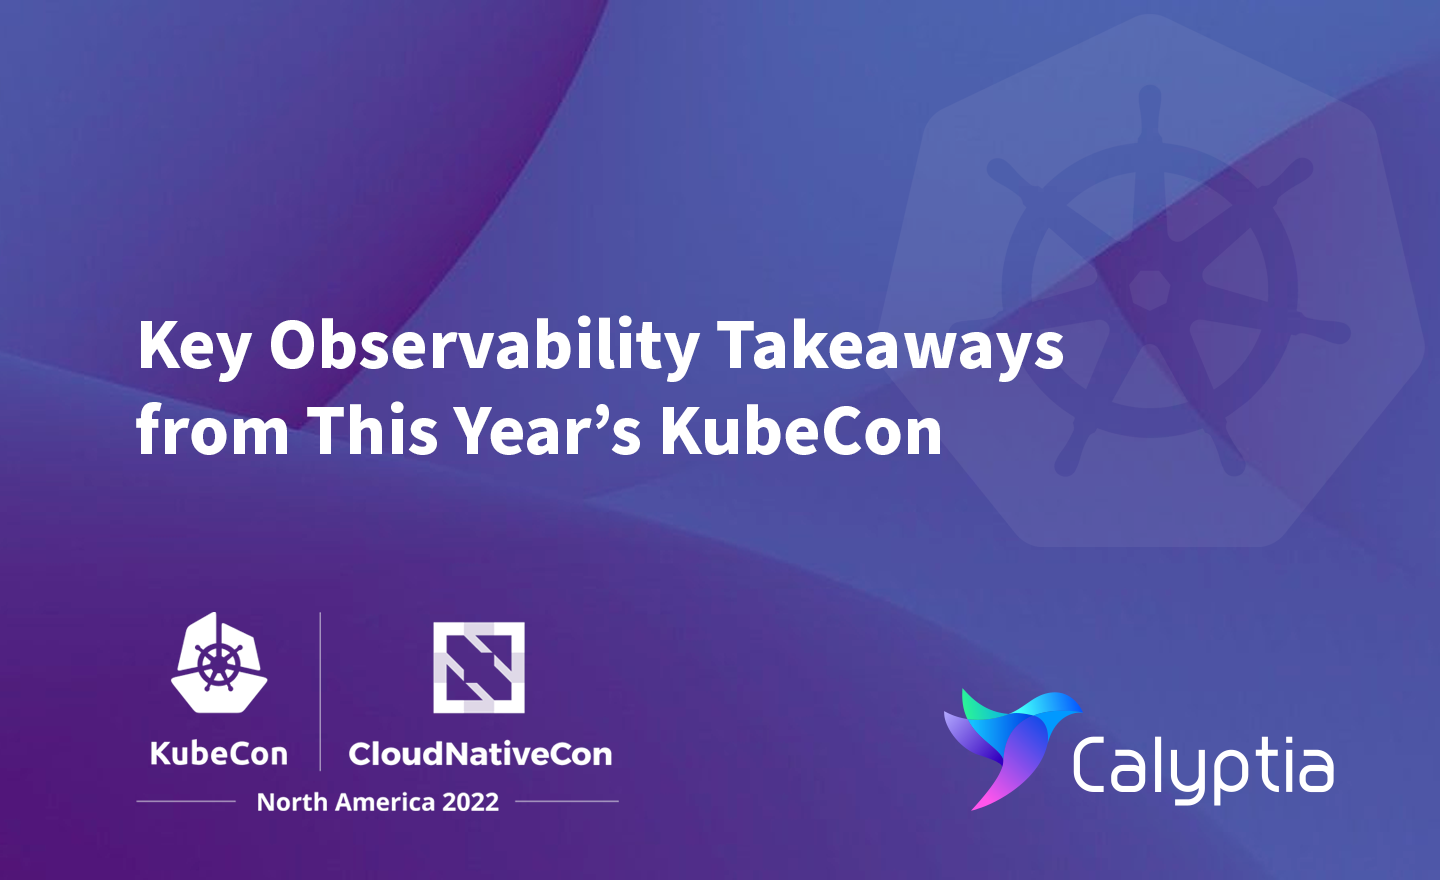 Key Observability Takeaways from this year's KubeCon